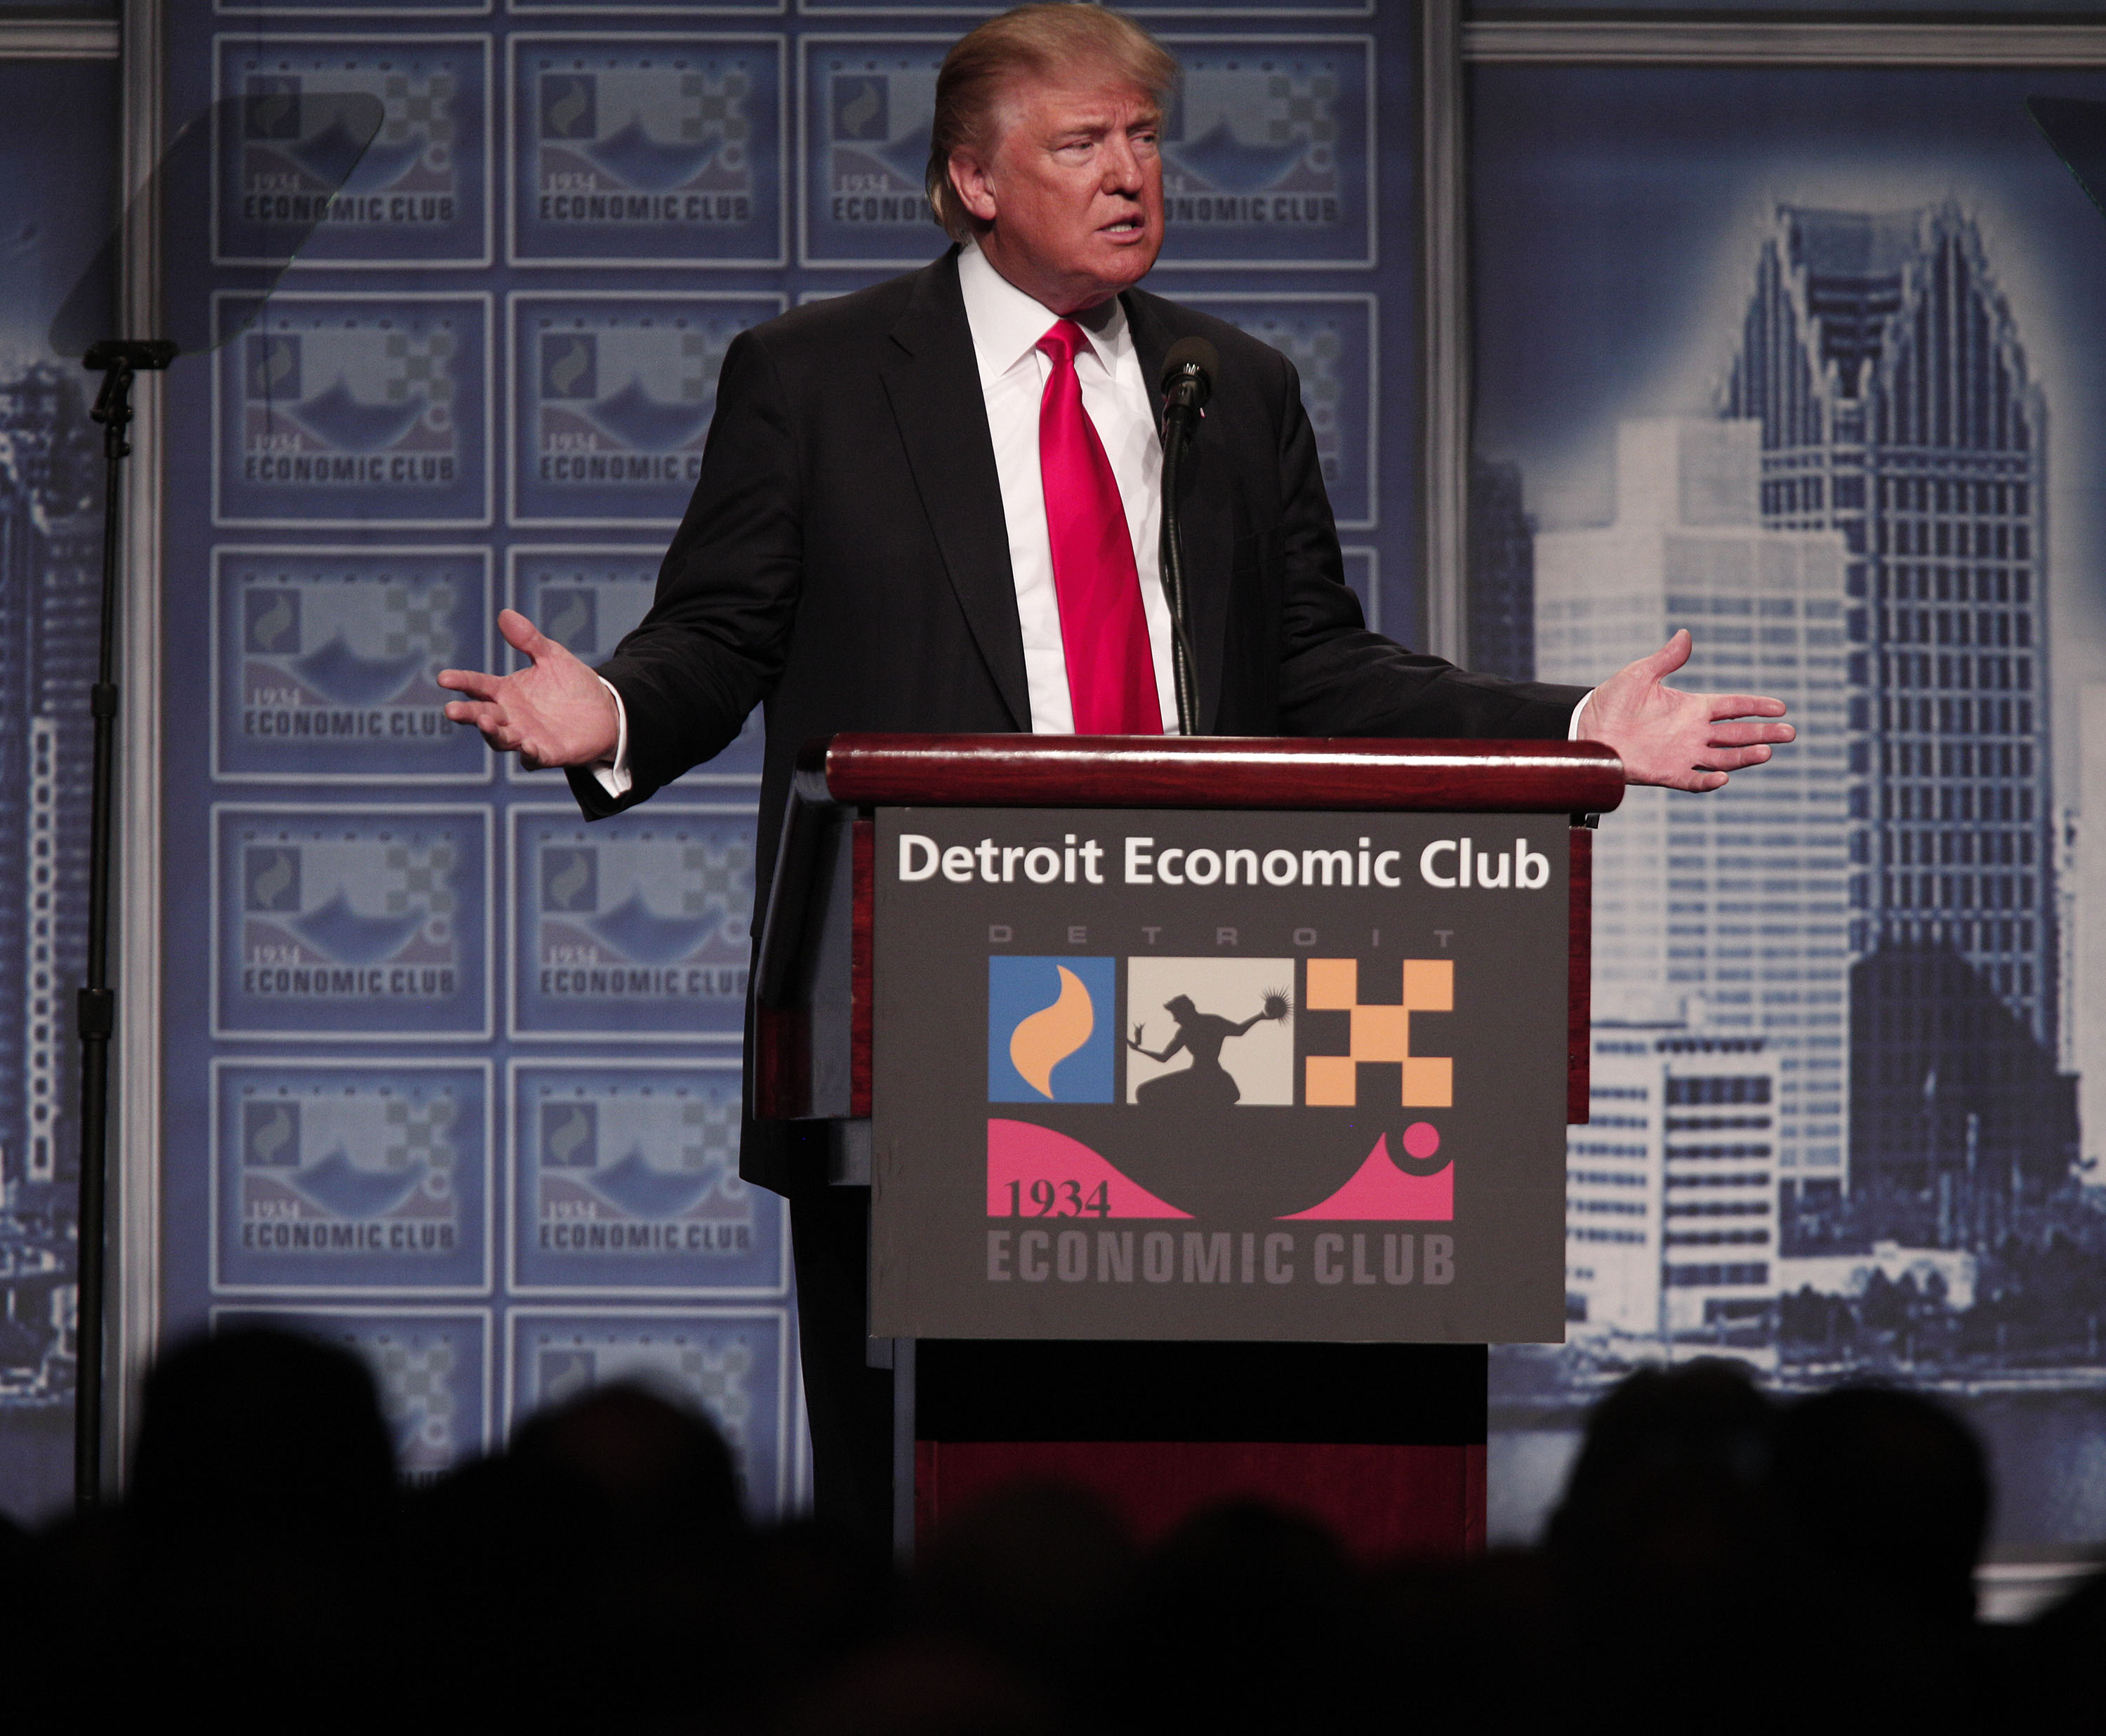 Republican presidential candidate Donald Trump delivers an economic policy address detailing his economic plan at the Detroit Economic Club in Detroit on Aug. 8, 2016. (Bill Pugliano—Getty Images)